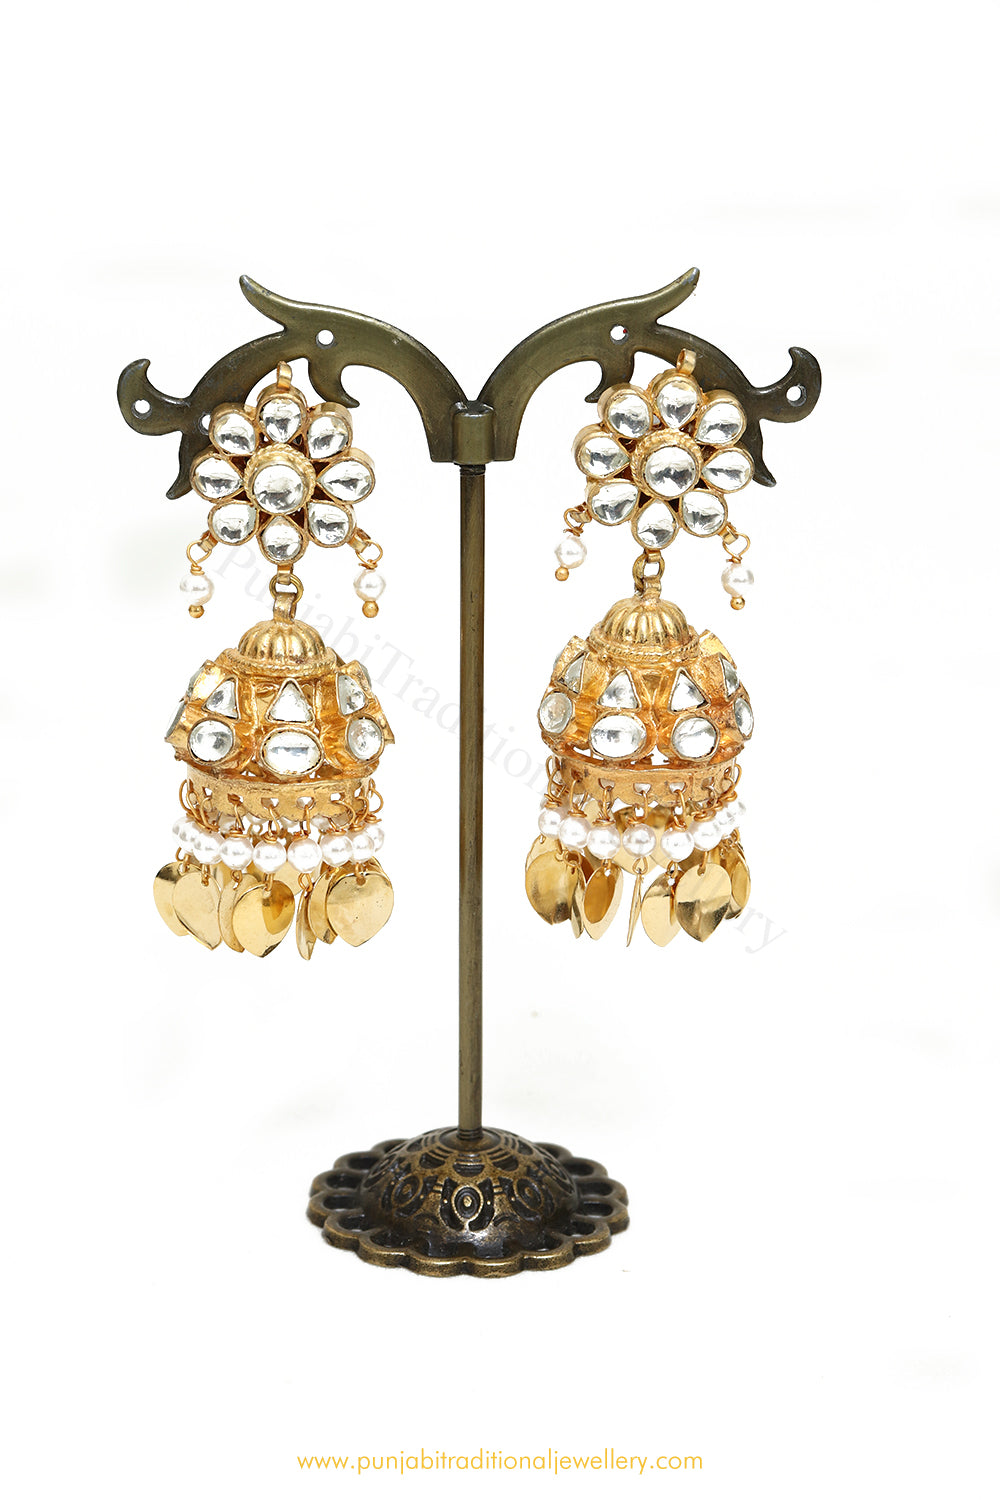 Punjabi Traditional Jewellery - NEW IN! • • • featured:- Gold Finished  Pippal Patti Lottan Earrings • • • Shop our latest collection at our store,  or visit our website today to